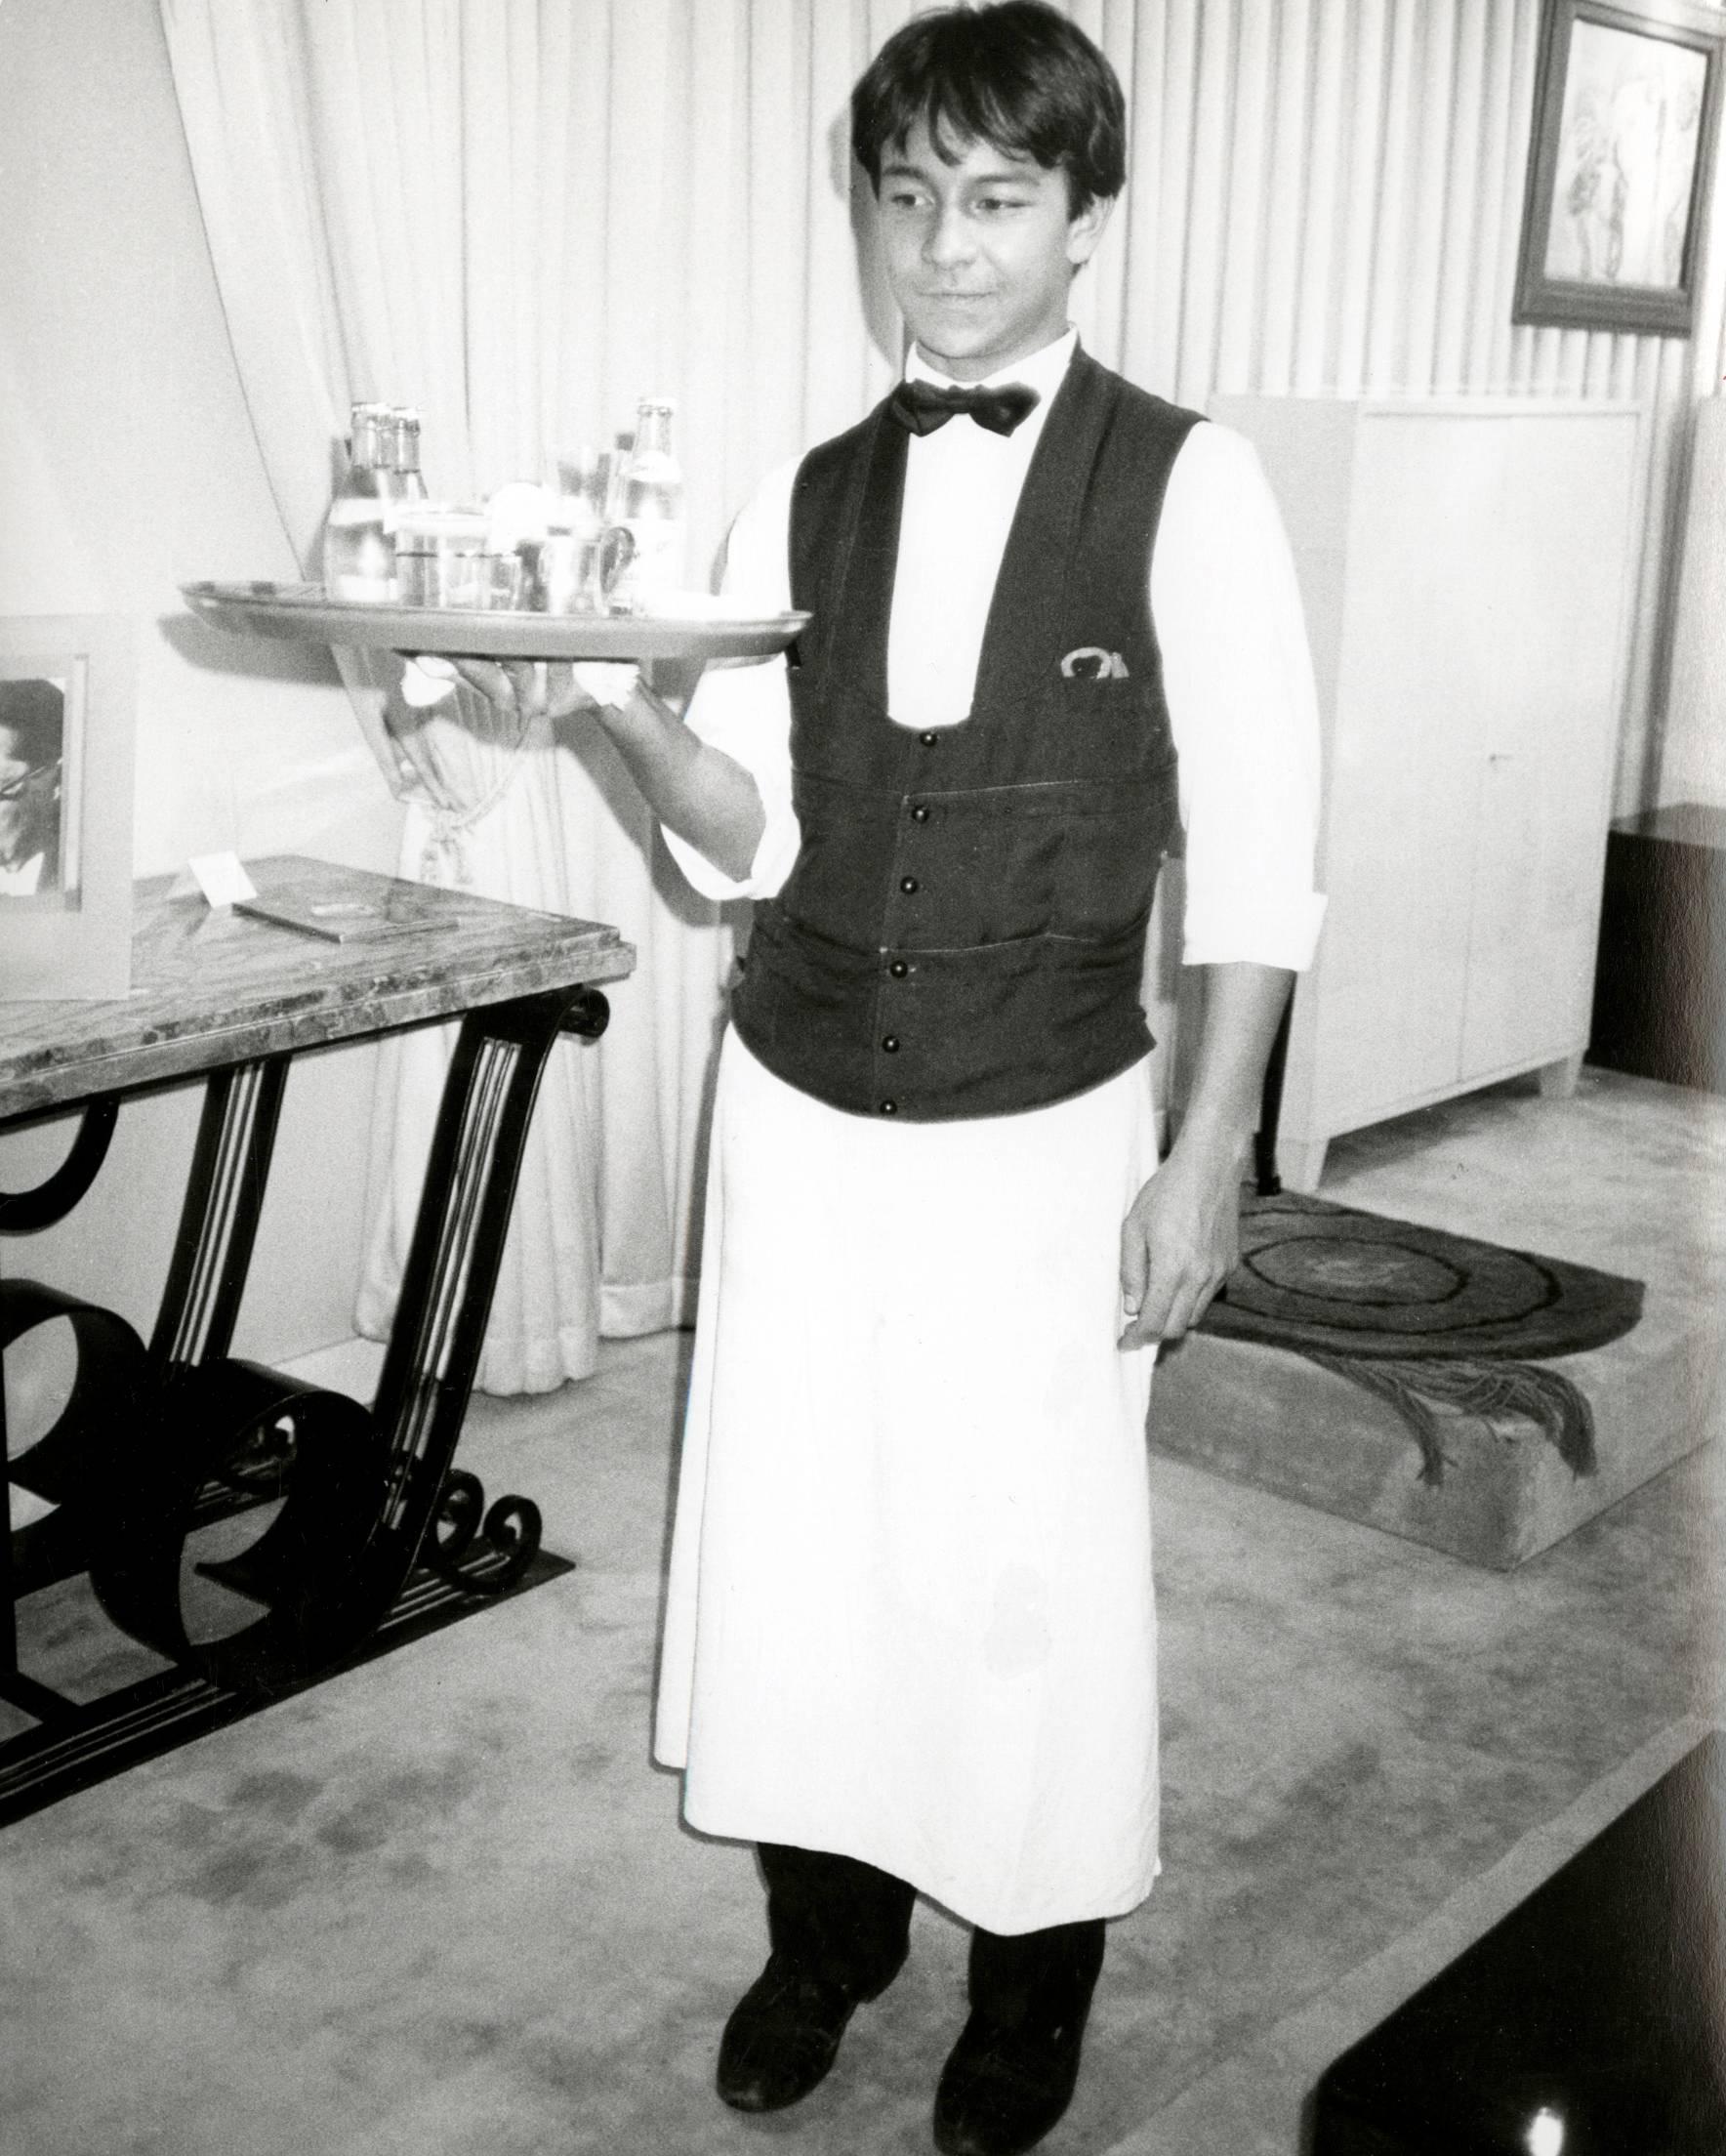 Photograph of a Young Waiter in Paris